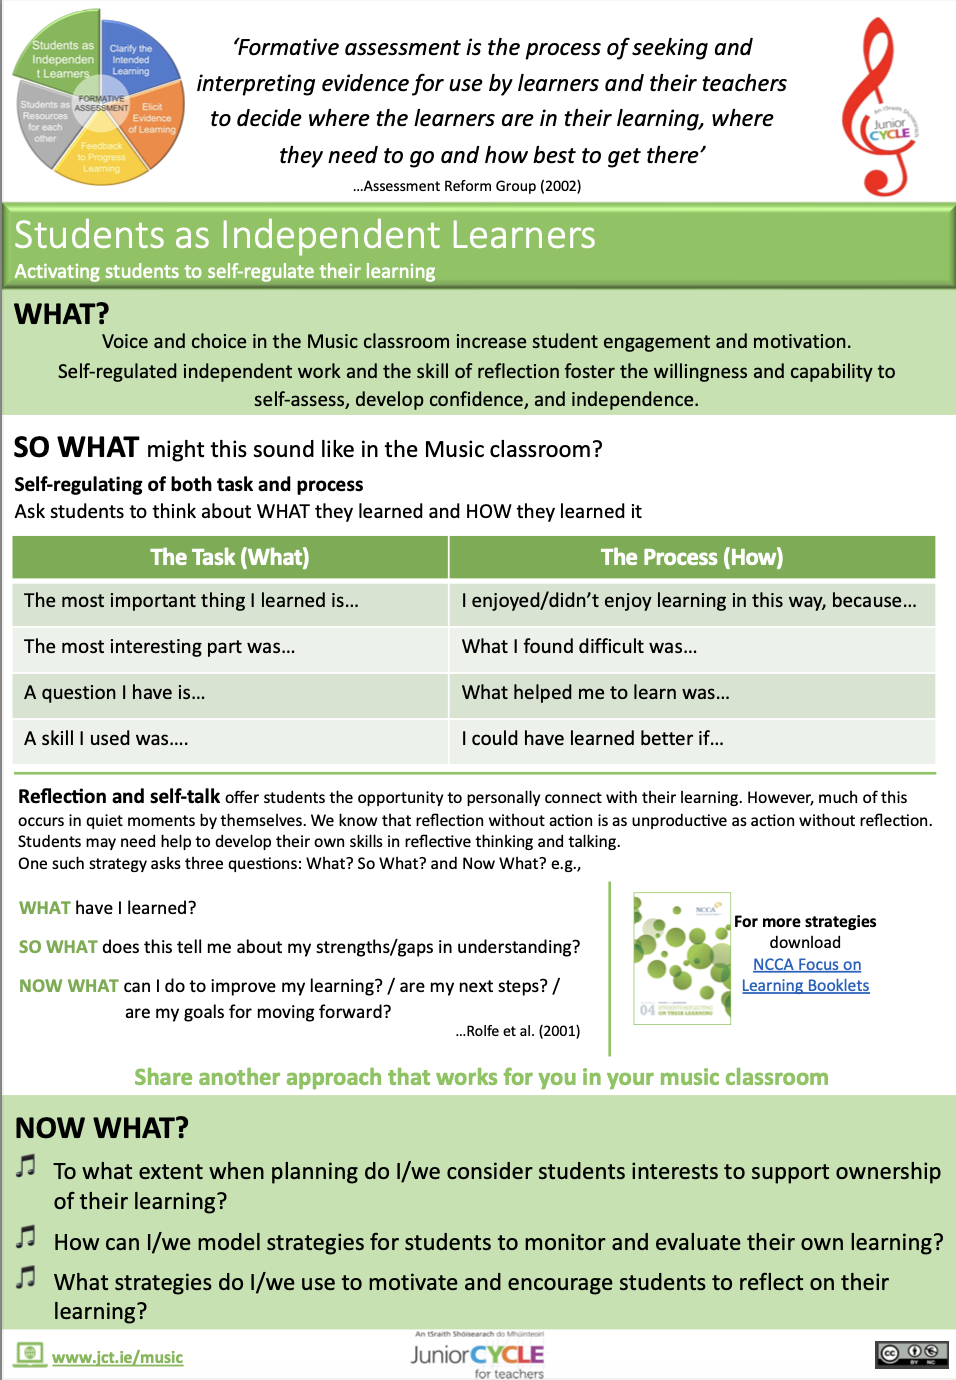 Students as Independent Learners